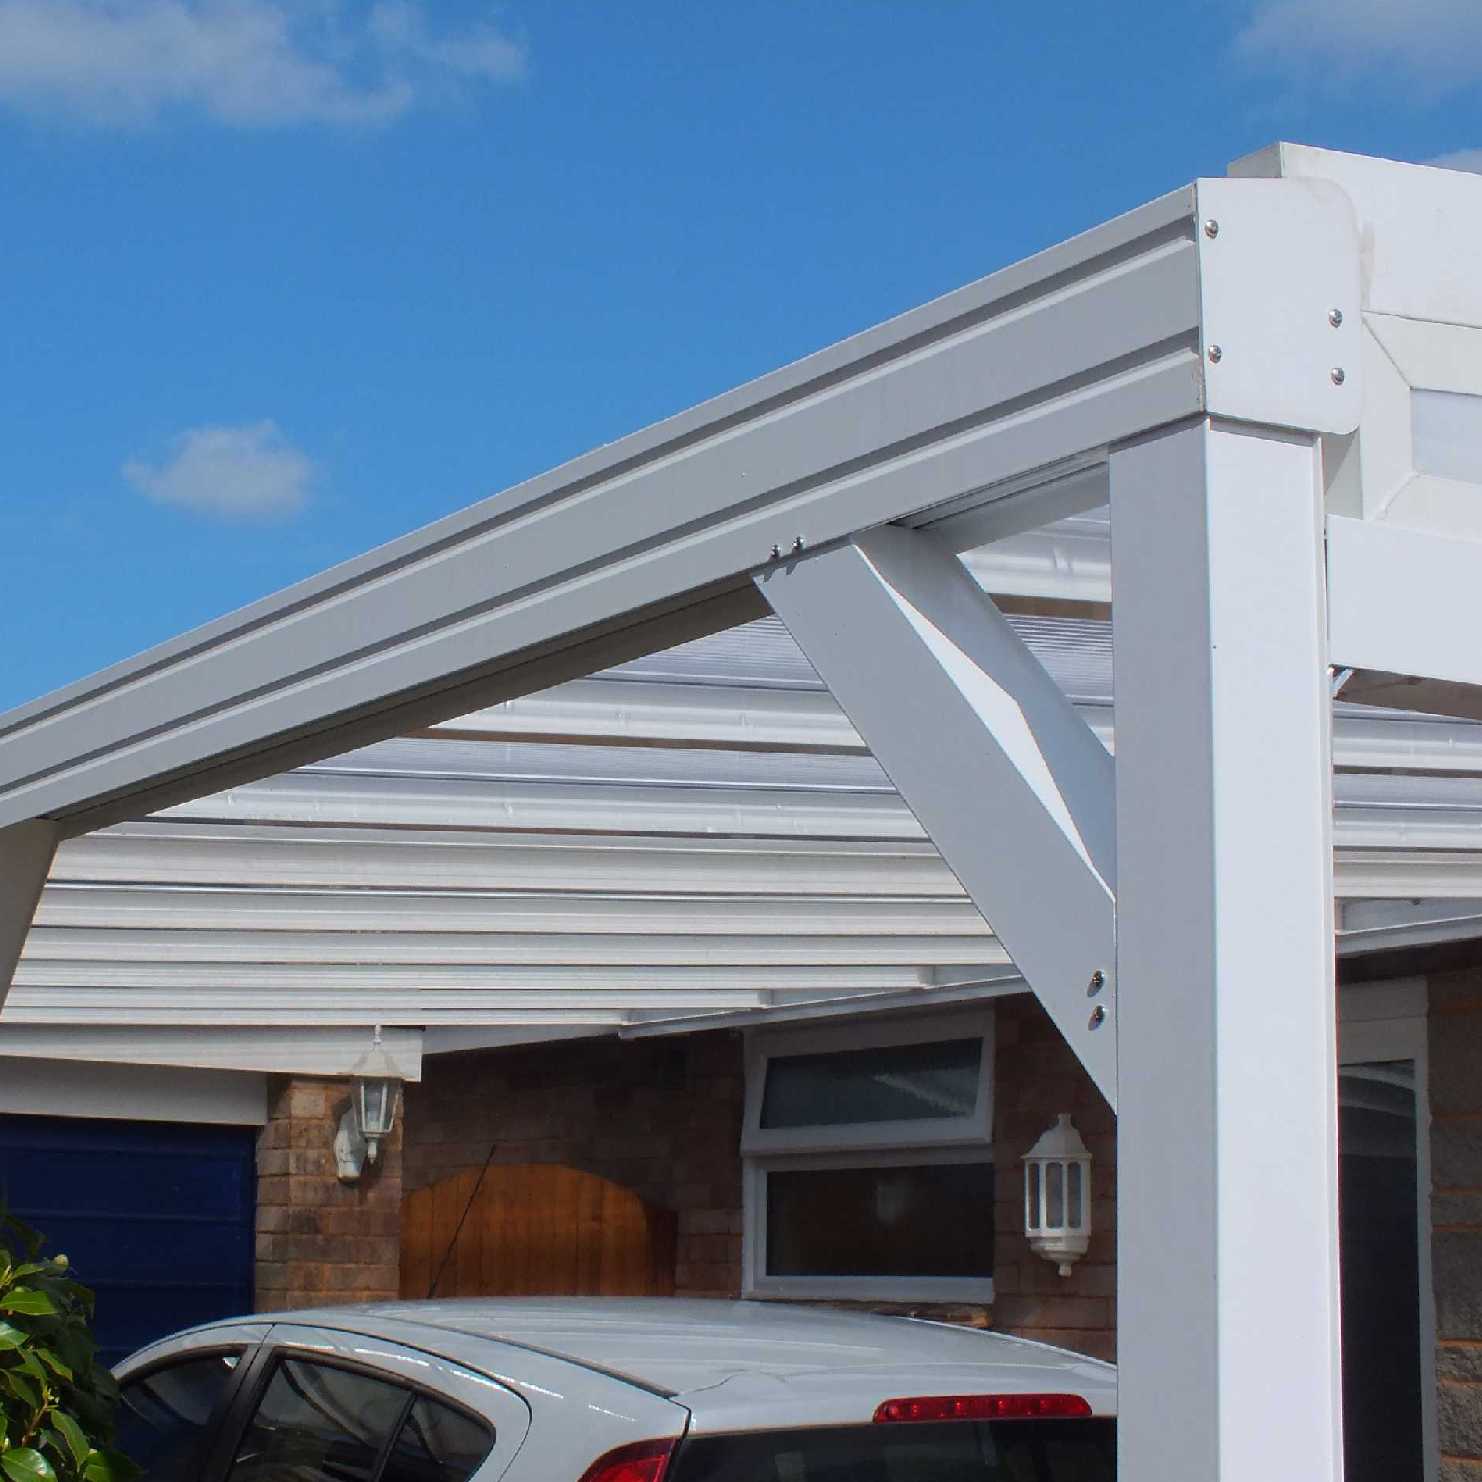 Great deals on Omega Smart Lean-To Canopy, White with 16mm Polycarbonate Glazing - 2.1m (W) x 4.0m (P), (2) Supporting Posts